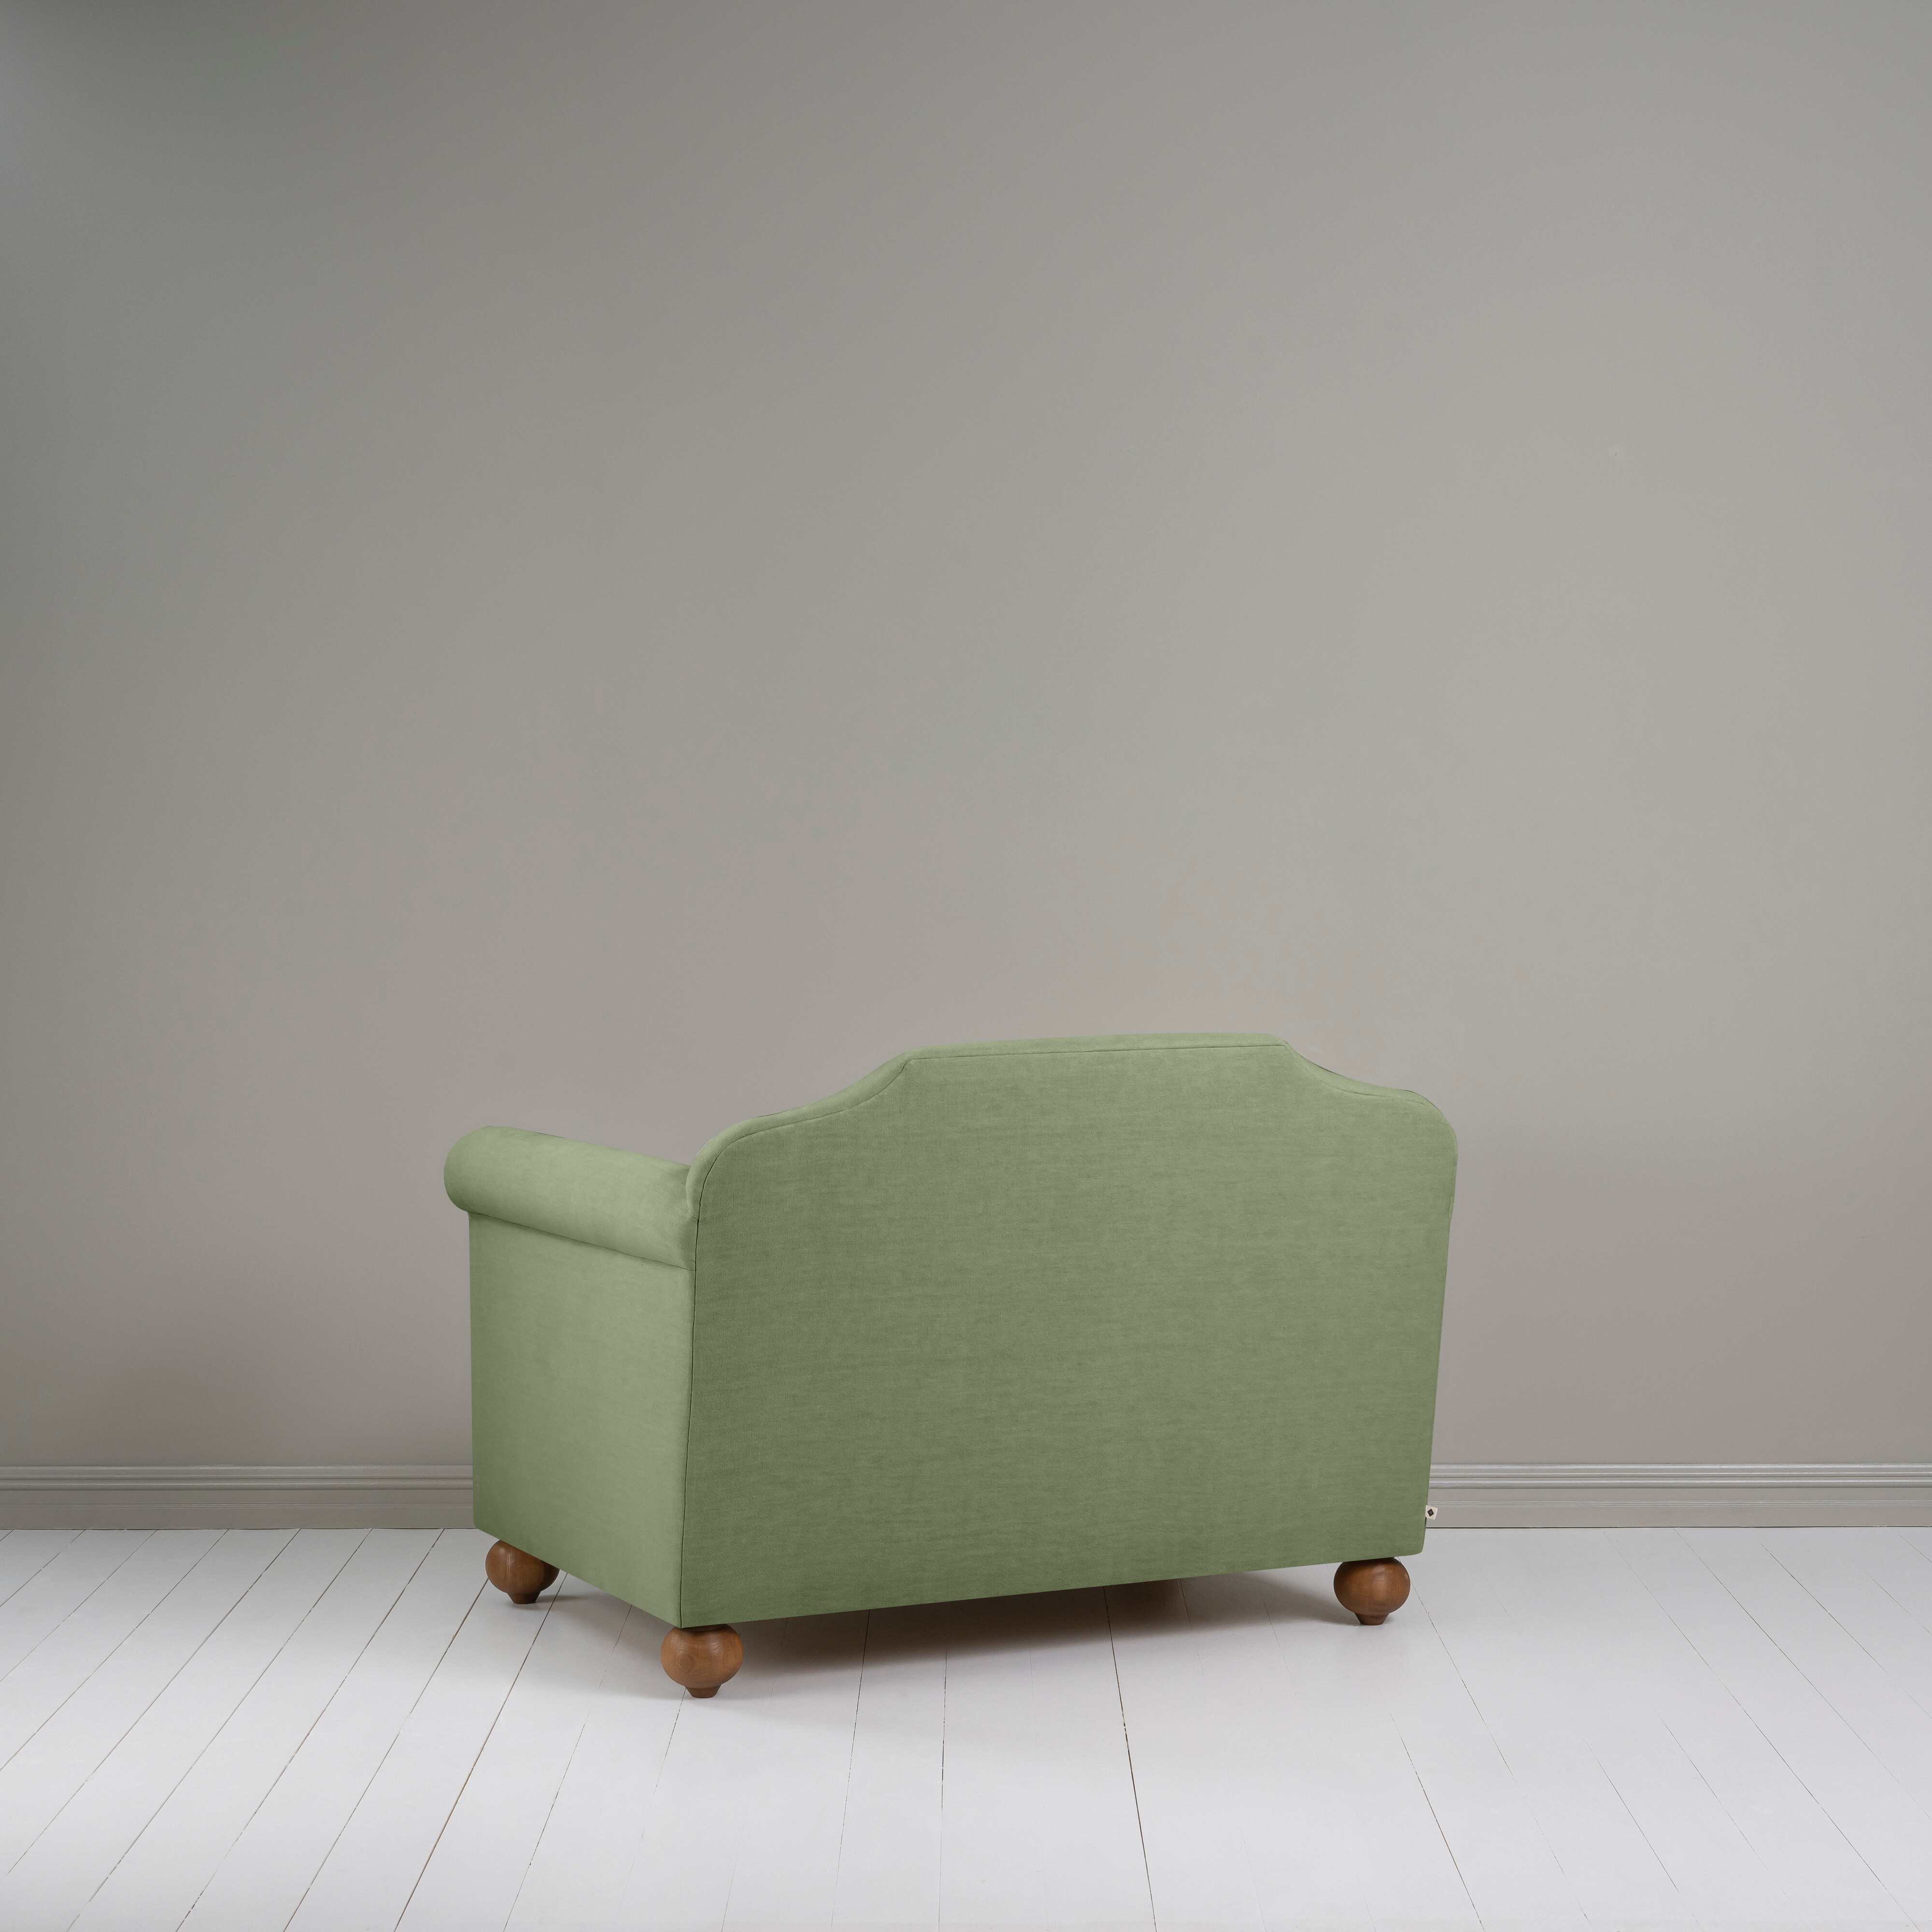  Dolittle Love Seat in Laidback Linen Moss 